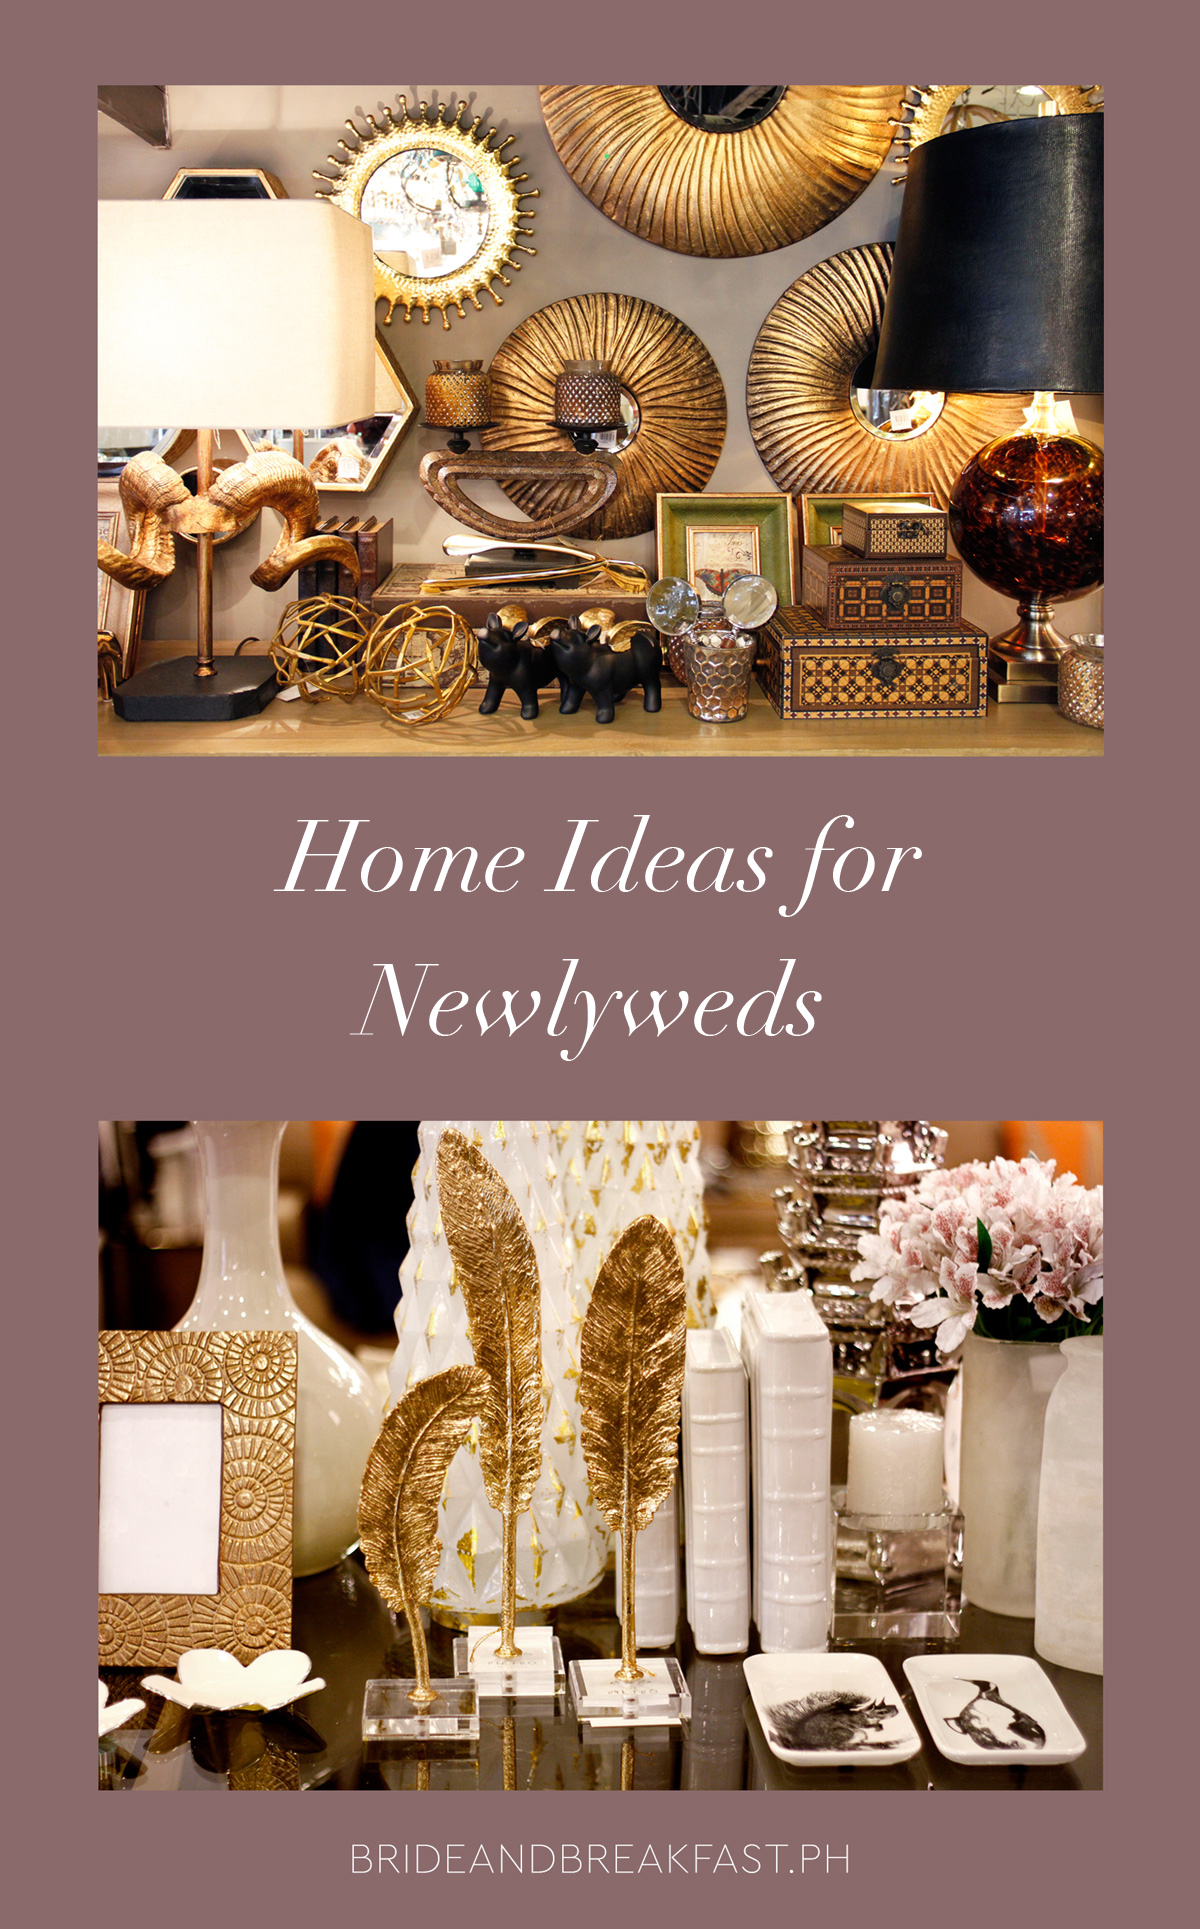 Home Ideas for Newlyweds